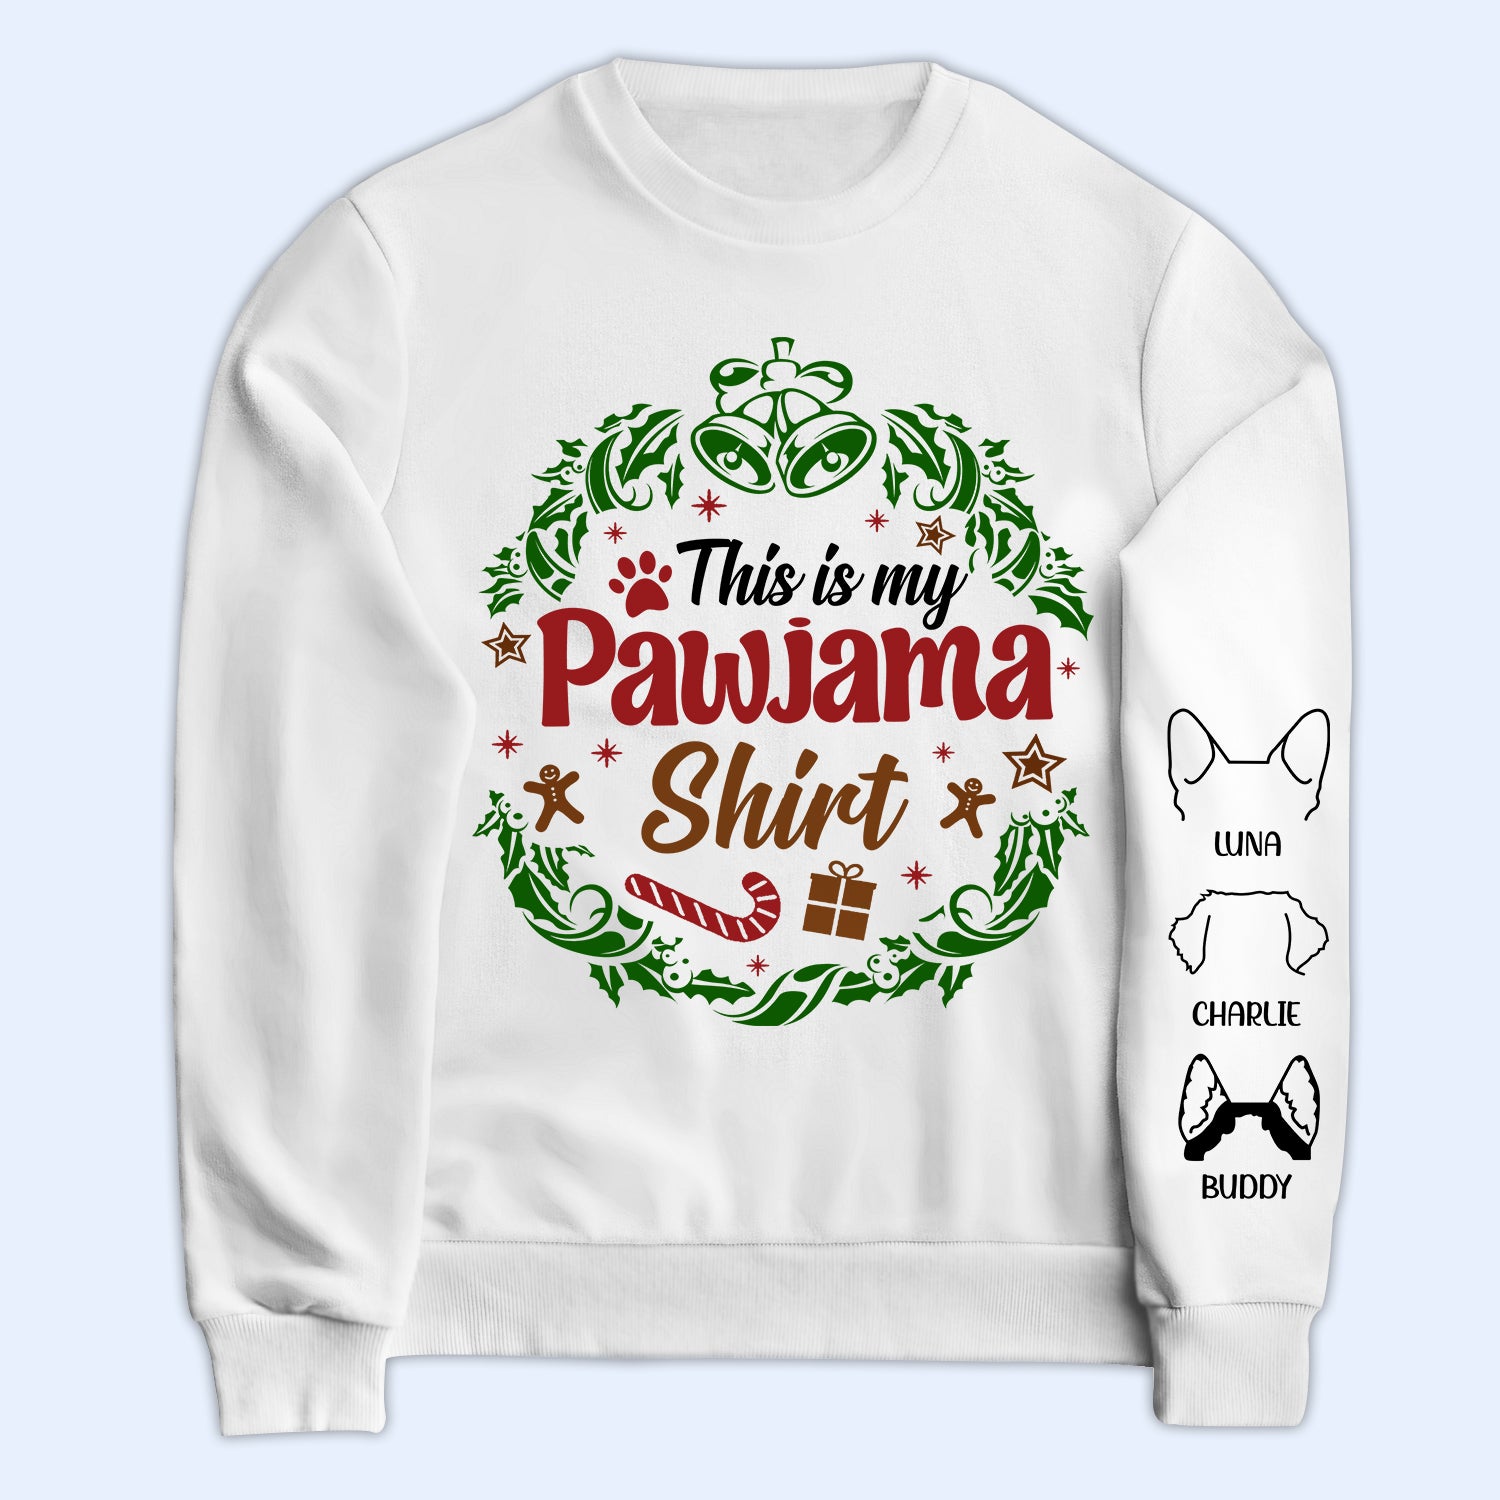 This Is My Pawjama Shirt - Christmas Gift For Dog Lover, Cat Lover, Pet Owner - Personalized Sweatshirt With Sleeve Imprint